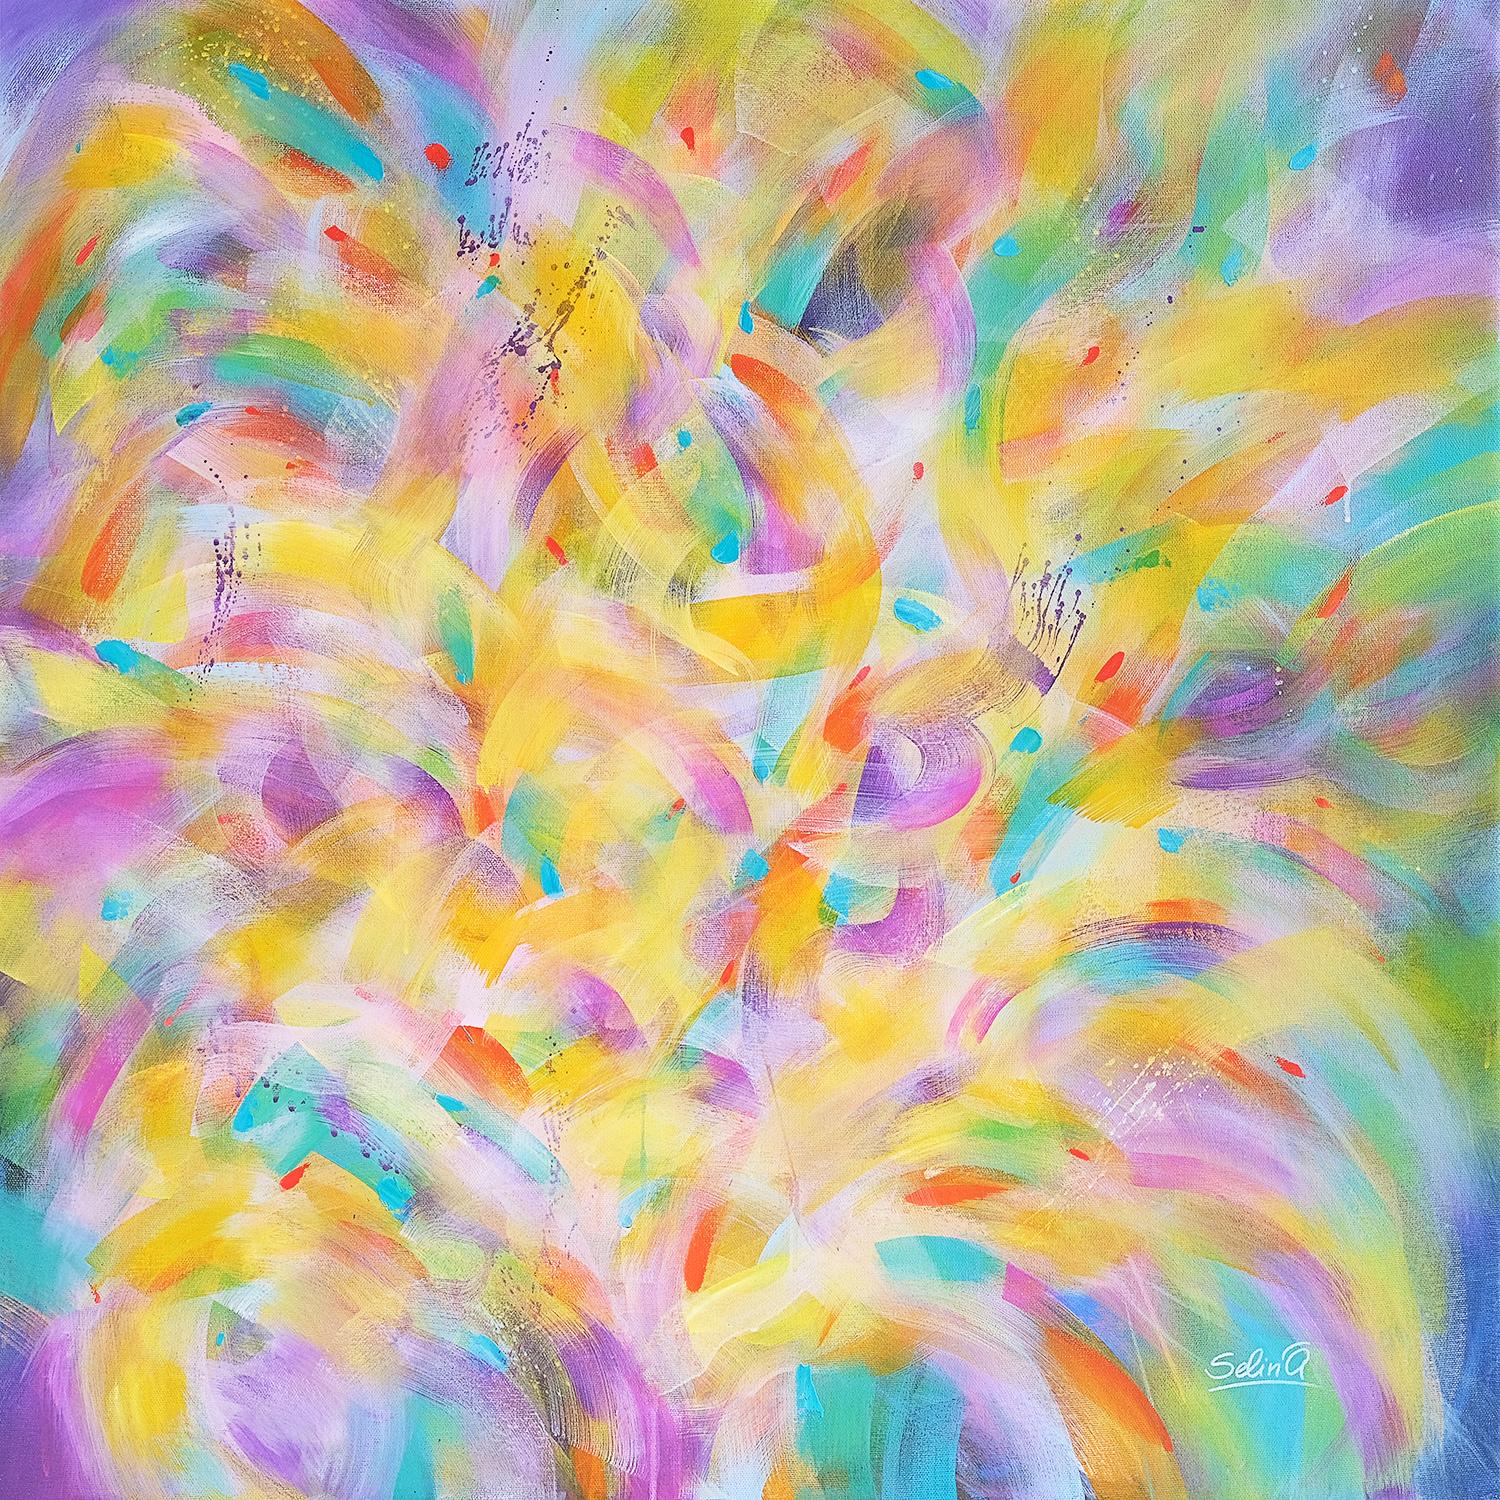 Spring light is one of the painting from my new series "The Light" about our awakening, light of inner world, of our deepness,spiritual searches and light of our individuality. Like in nature, spring light awaken everything around, it is soft and